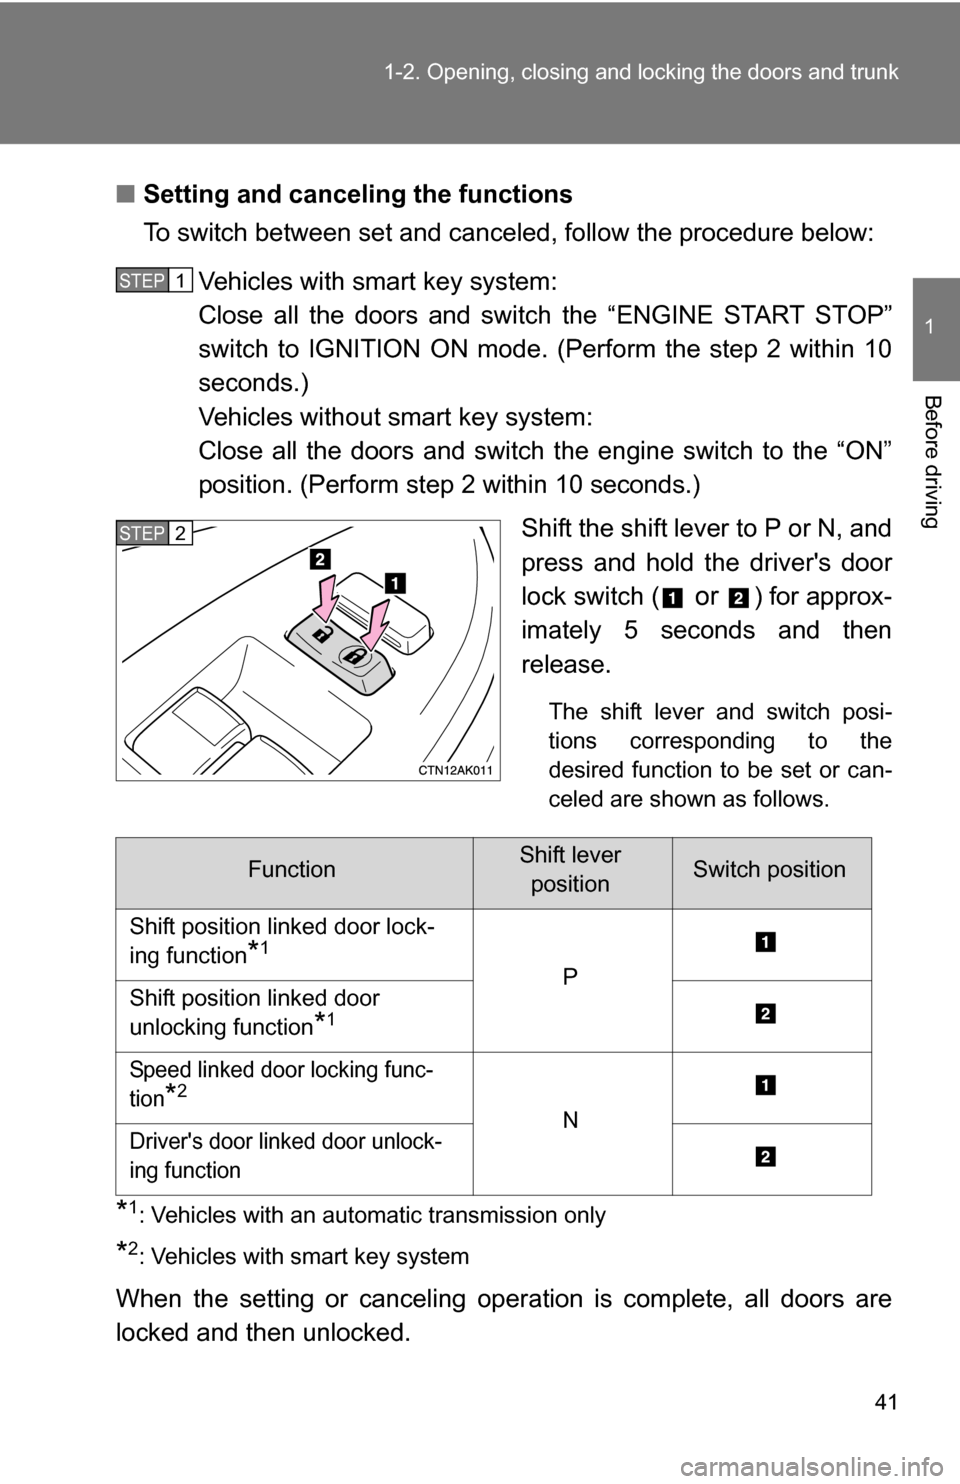 TOYOTA COROLLA 2009 10.G Owners Manual 41
1-2. Opening, closing and locking the doors and trunk
1
Before driving
■
Setting and canceling the functions
To switch between set and canceled, follow the procedure below:
Vehicles with smart ke